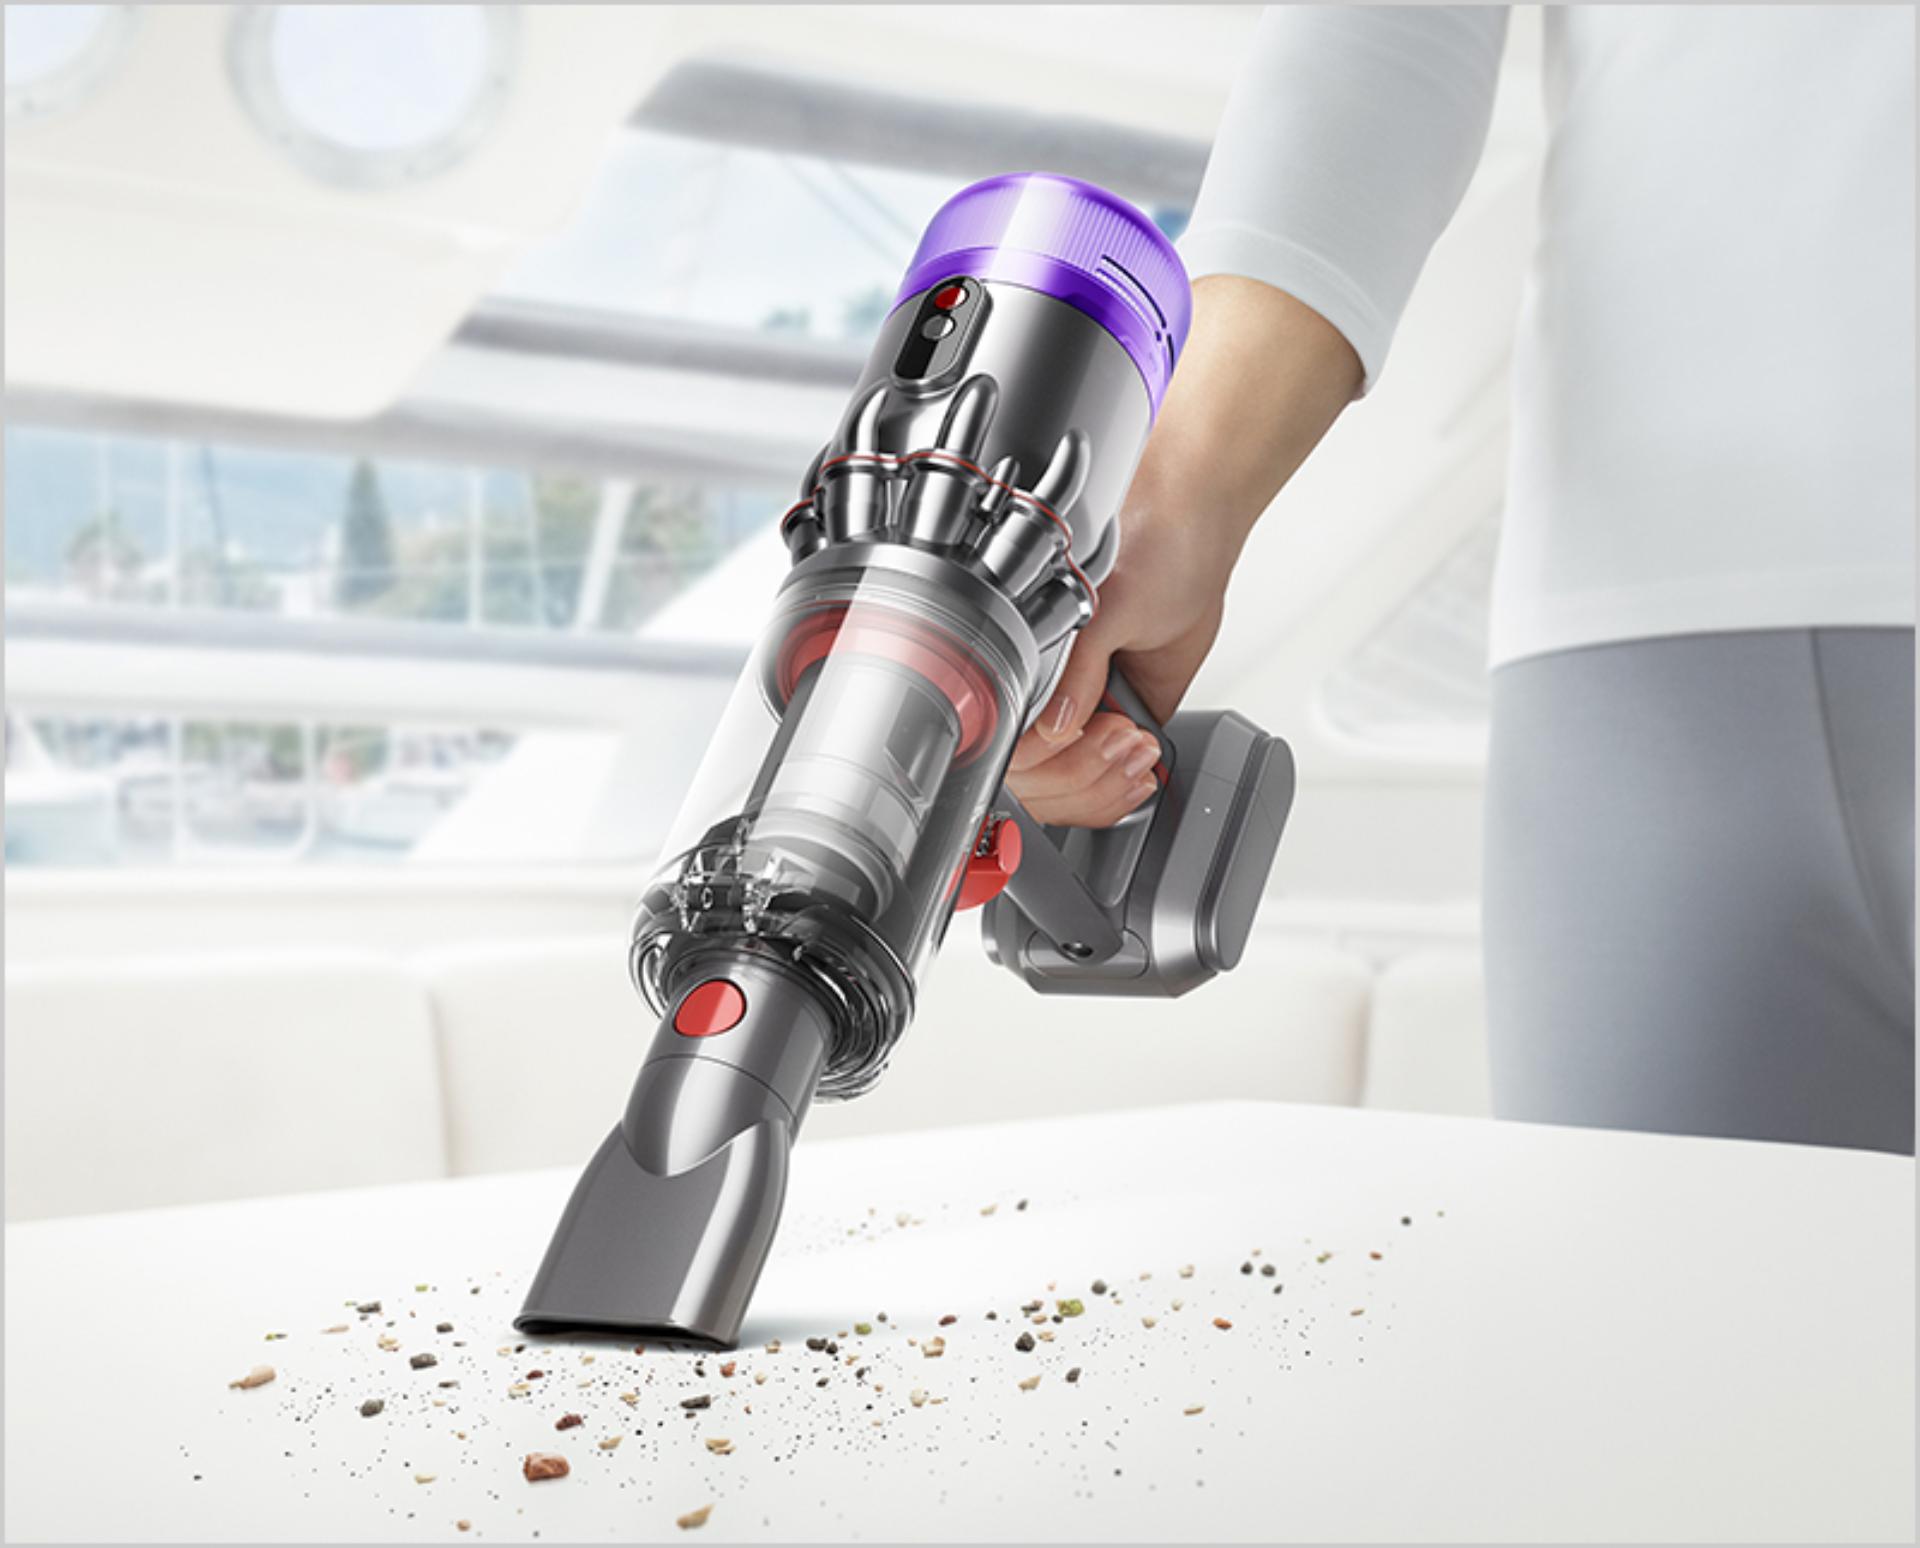 Dyson Micro with Worktop tool cleaning crumbs from a kitchen surface.